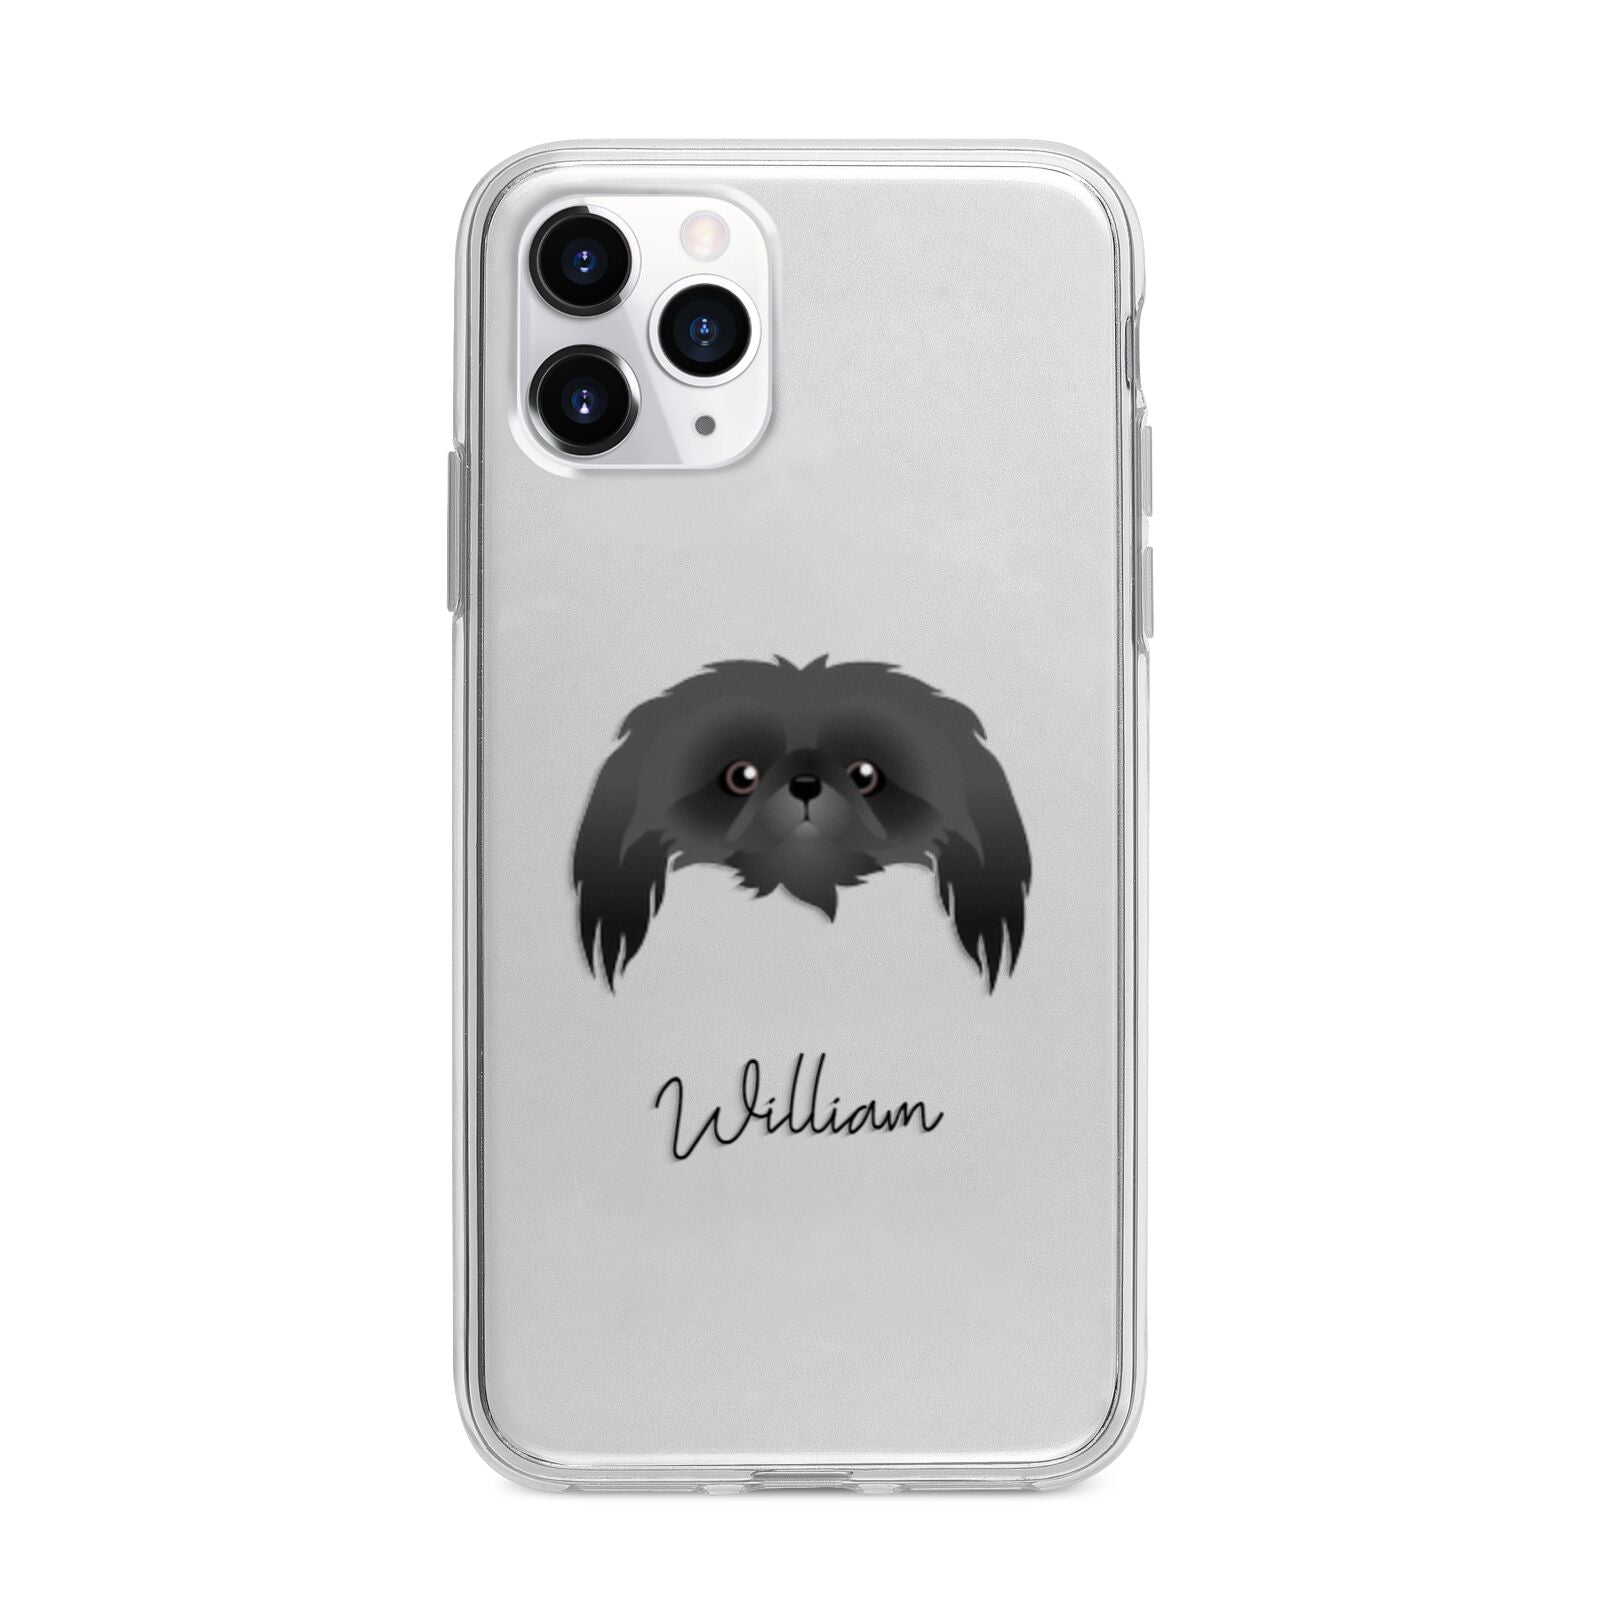 Pekingese Personalised Apple iPhone 11 Pro Max in Silver with Bumper Case